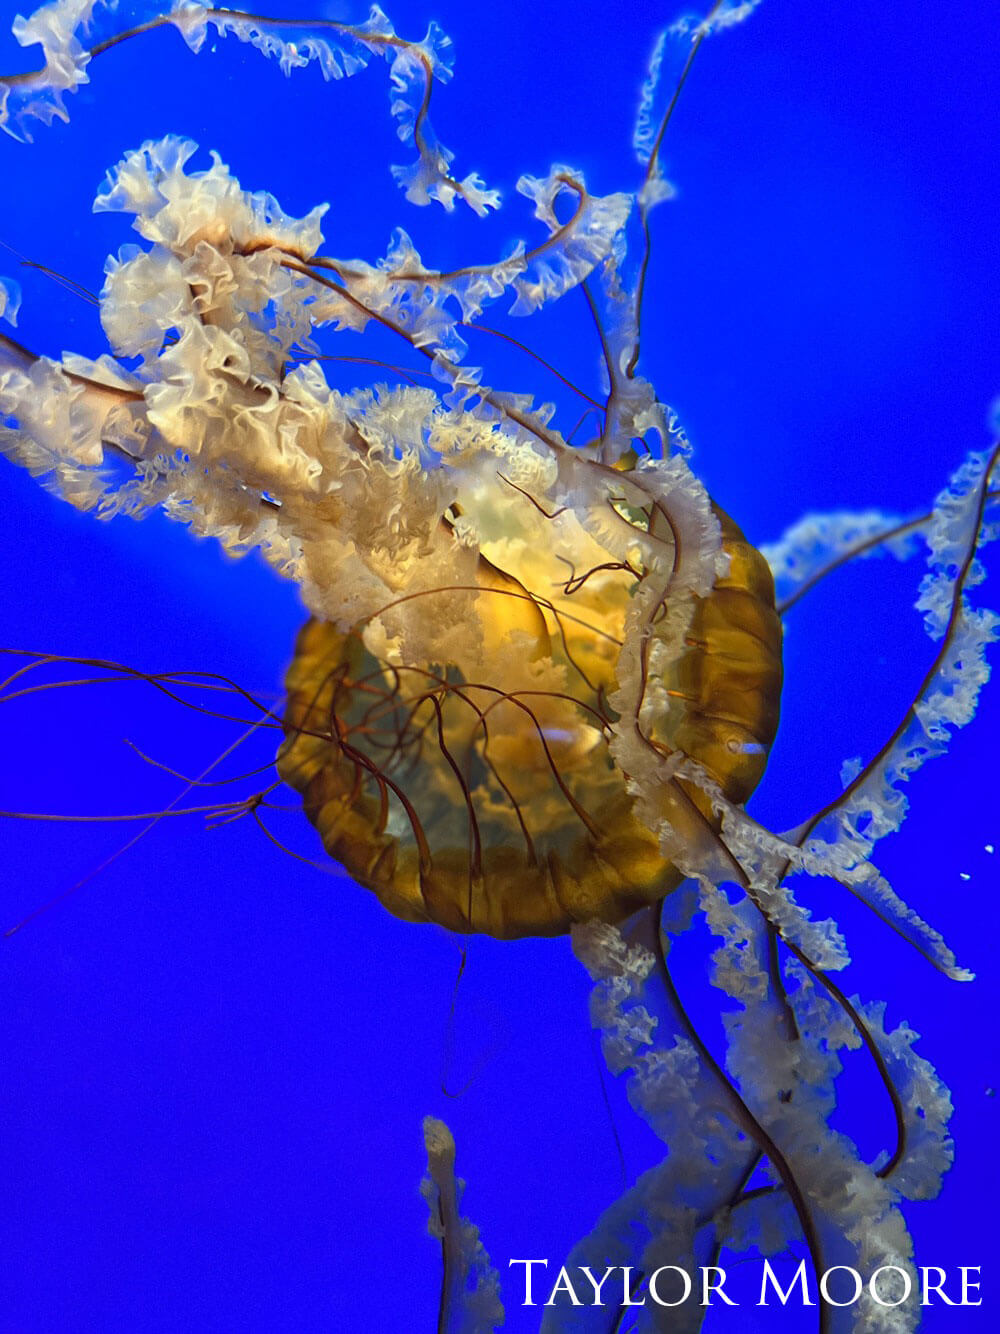 Jellyfish with tenticles in different directions in a dark blue tank.